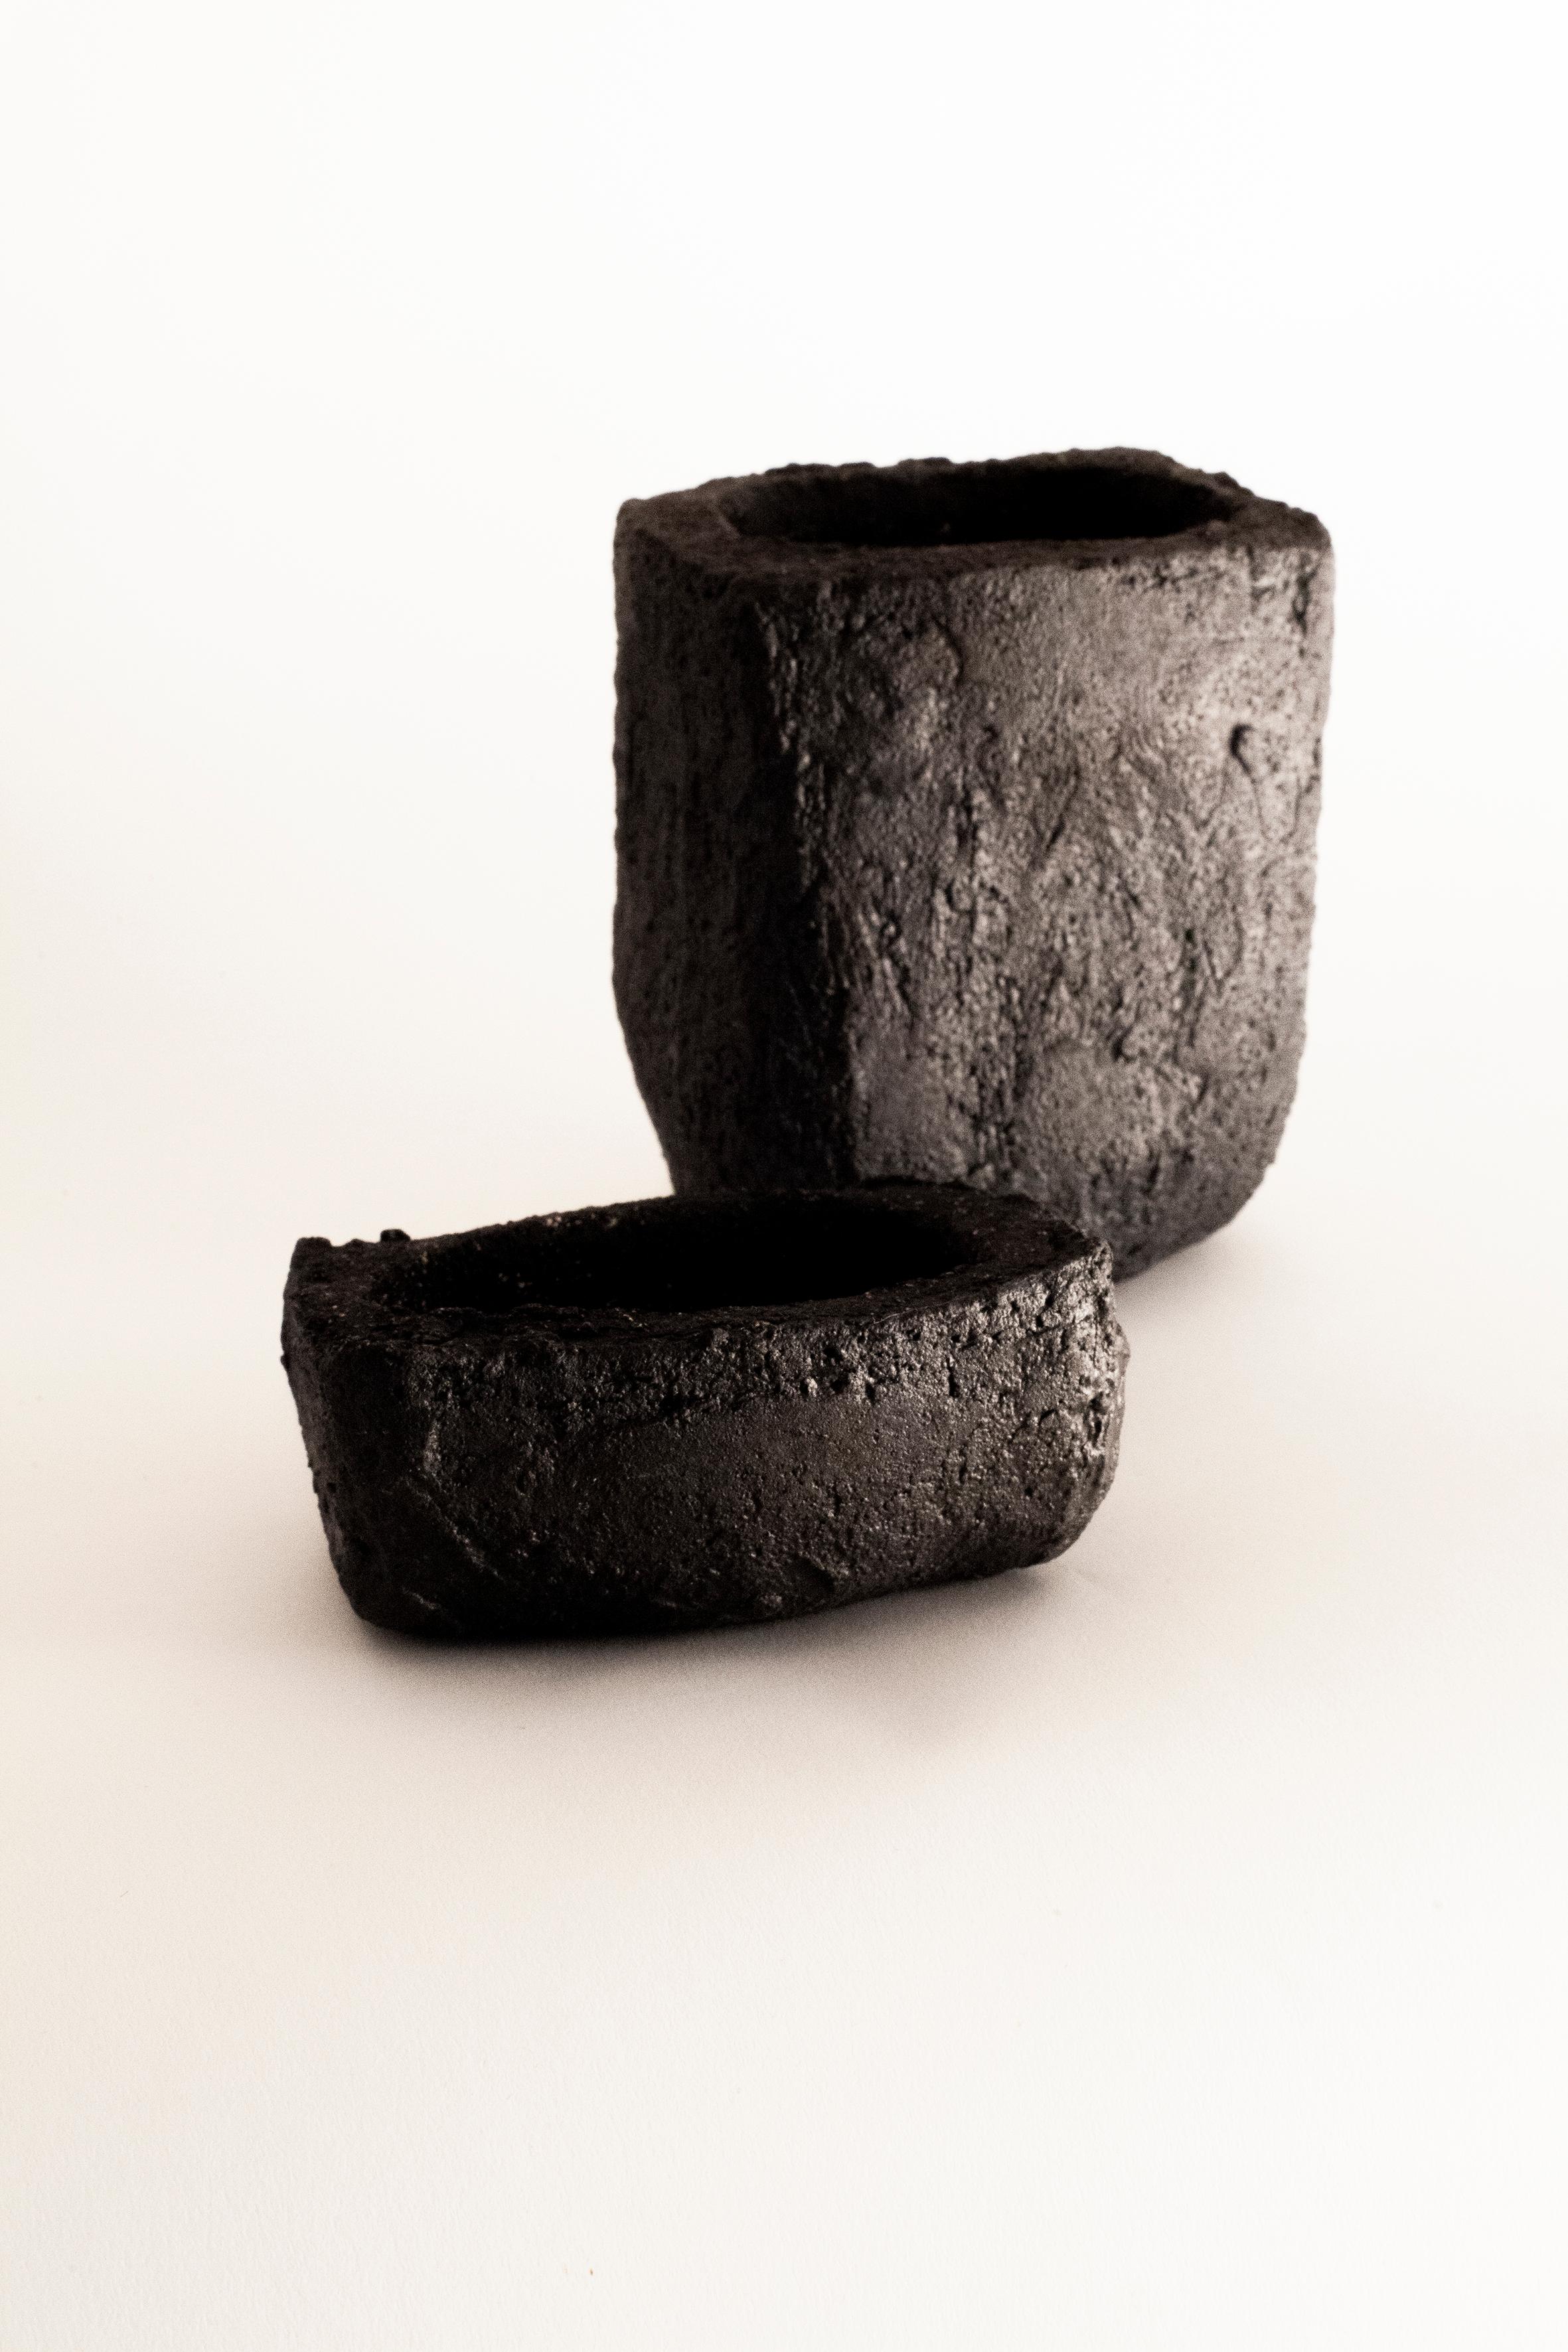 A unique stoneware box by Danish artist Christine Roland. Made from gritty, black stoneware with a silvery, black finish, referencing the artists Nordic background and dark, Scandinavian Winters. A decorative object or container for precious items.